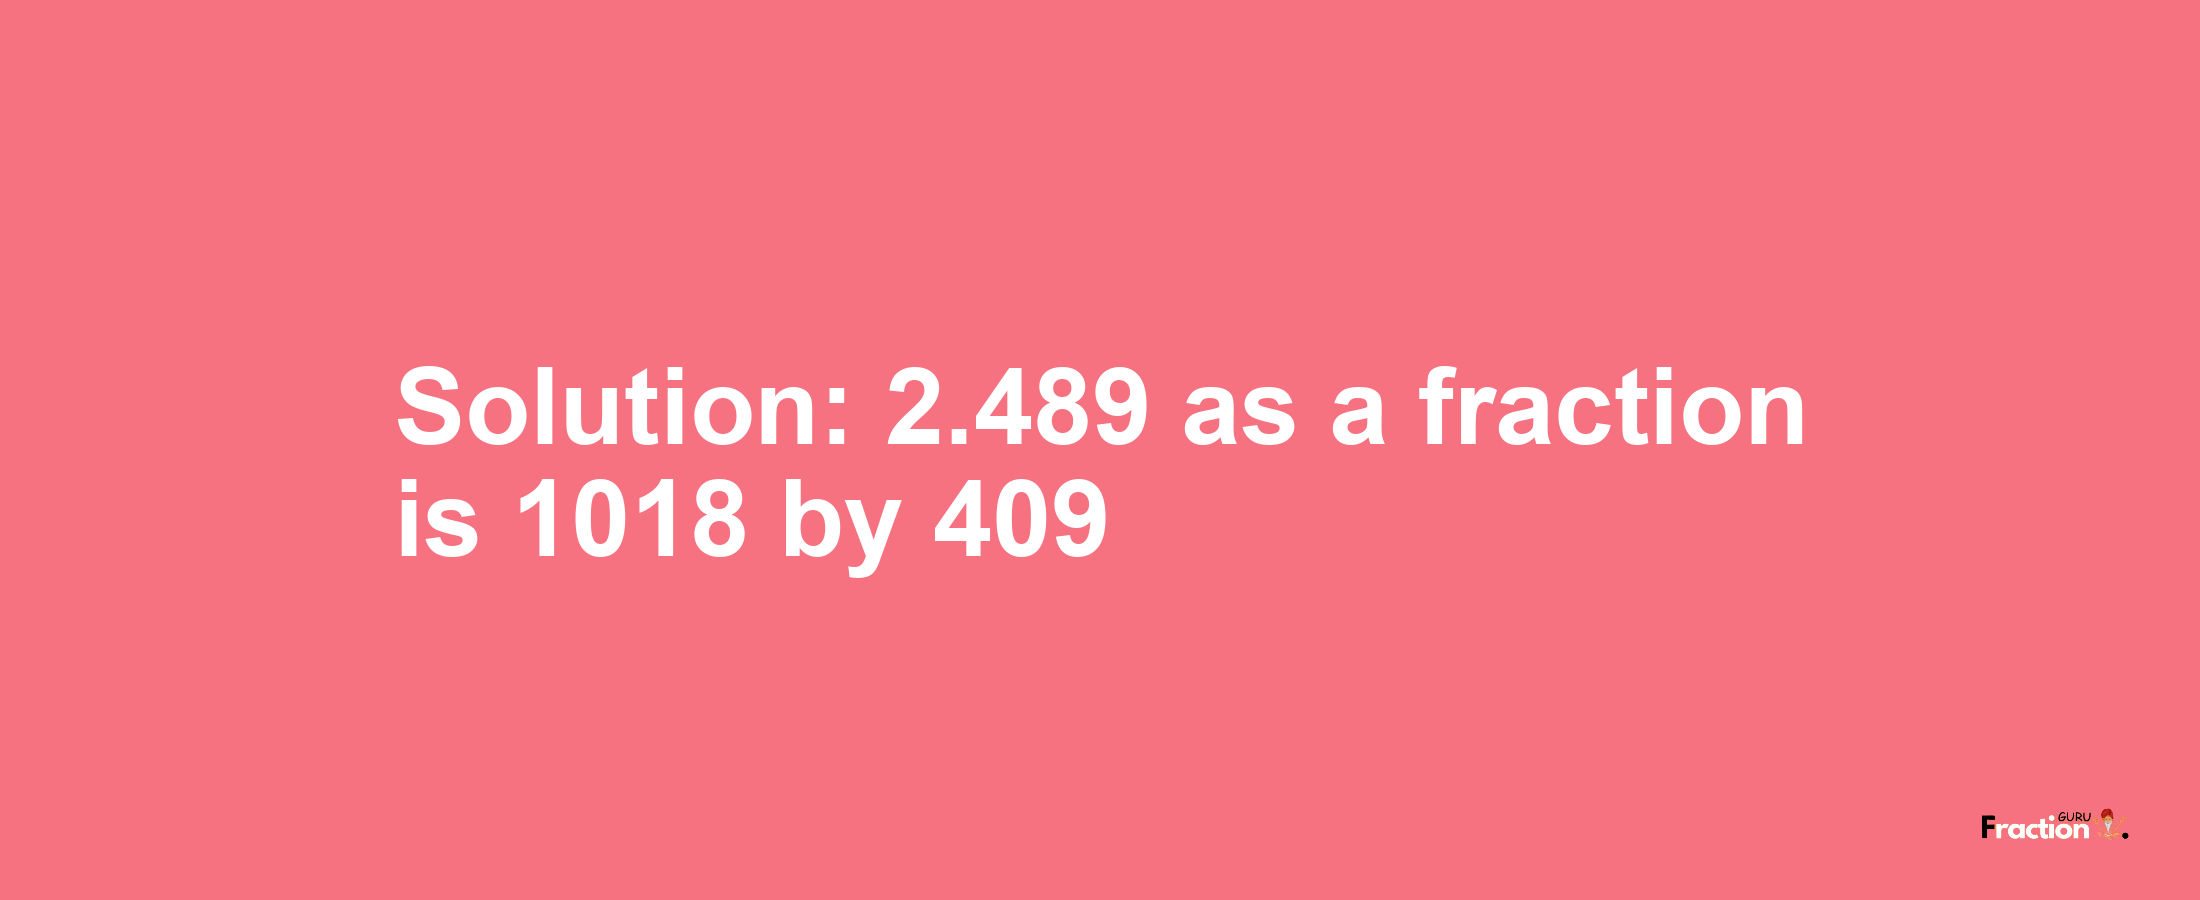 Solution:2.489 as a fraction is 1018/409